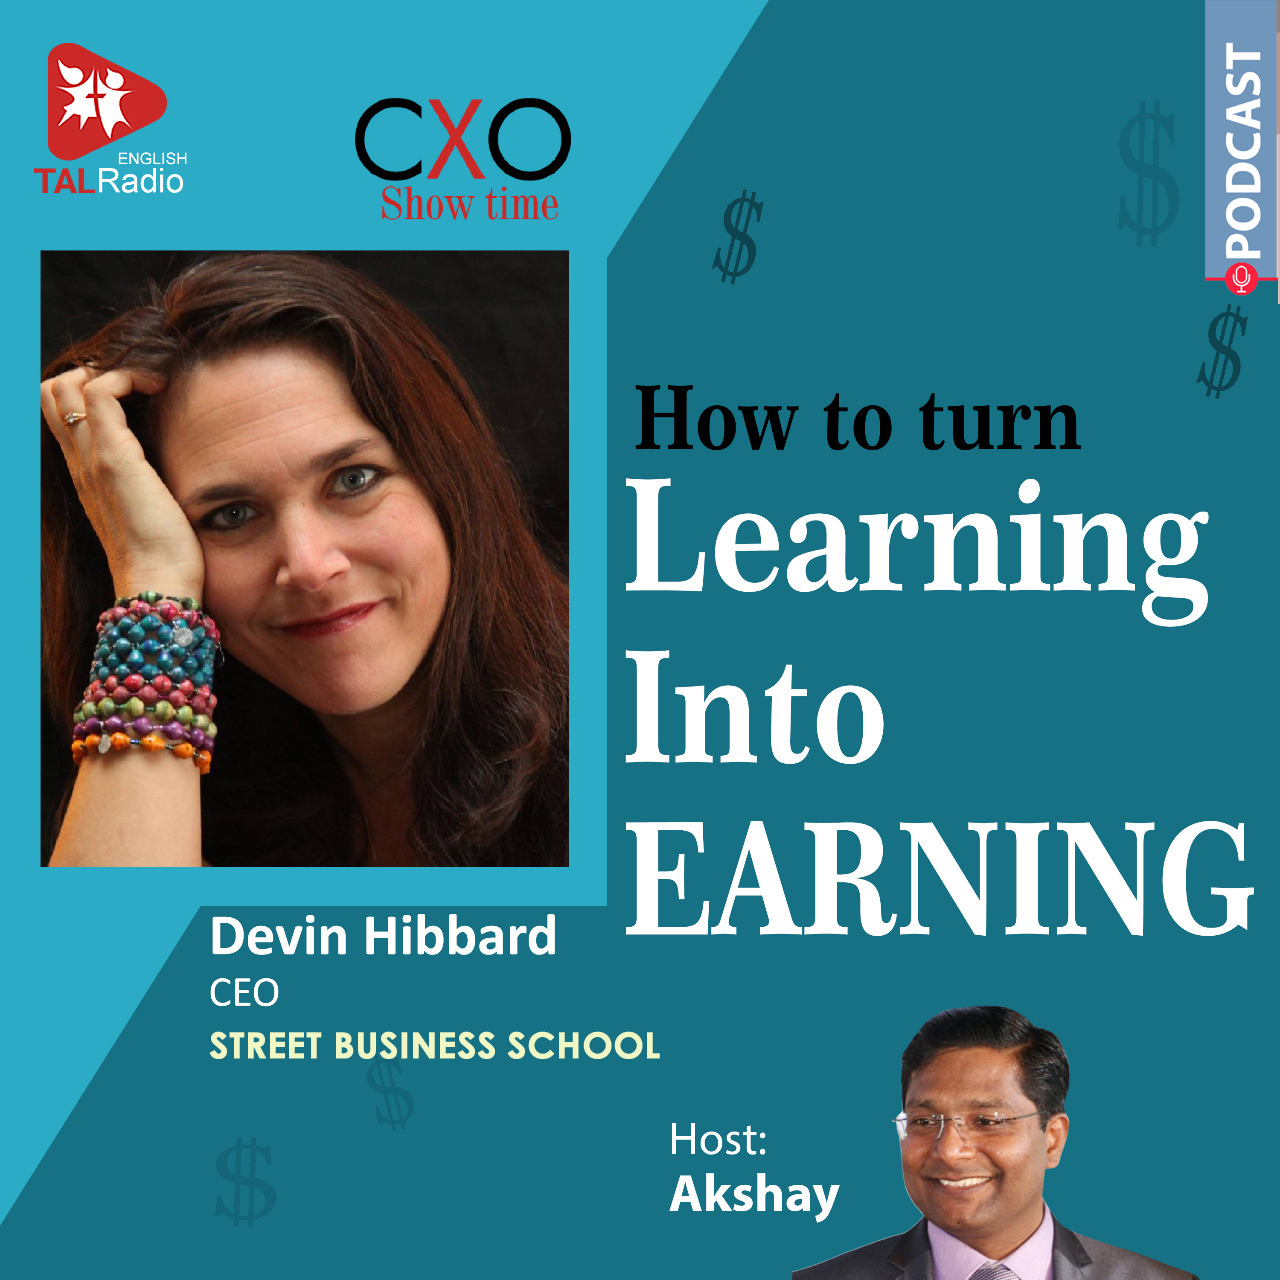 How to turn Learning into EARNING | CXO Show Time